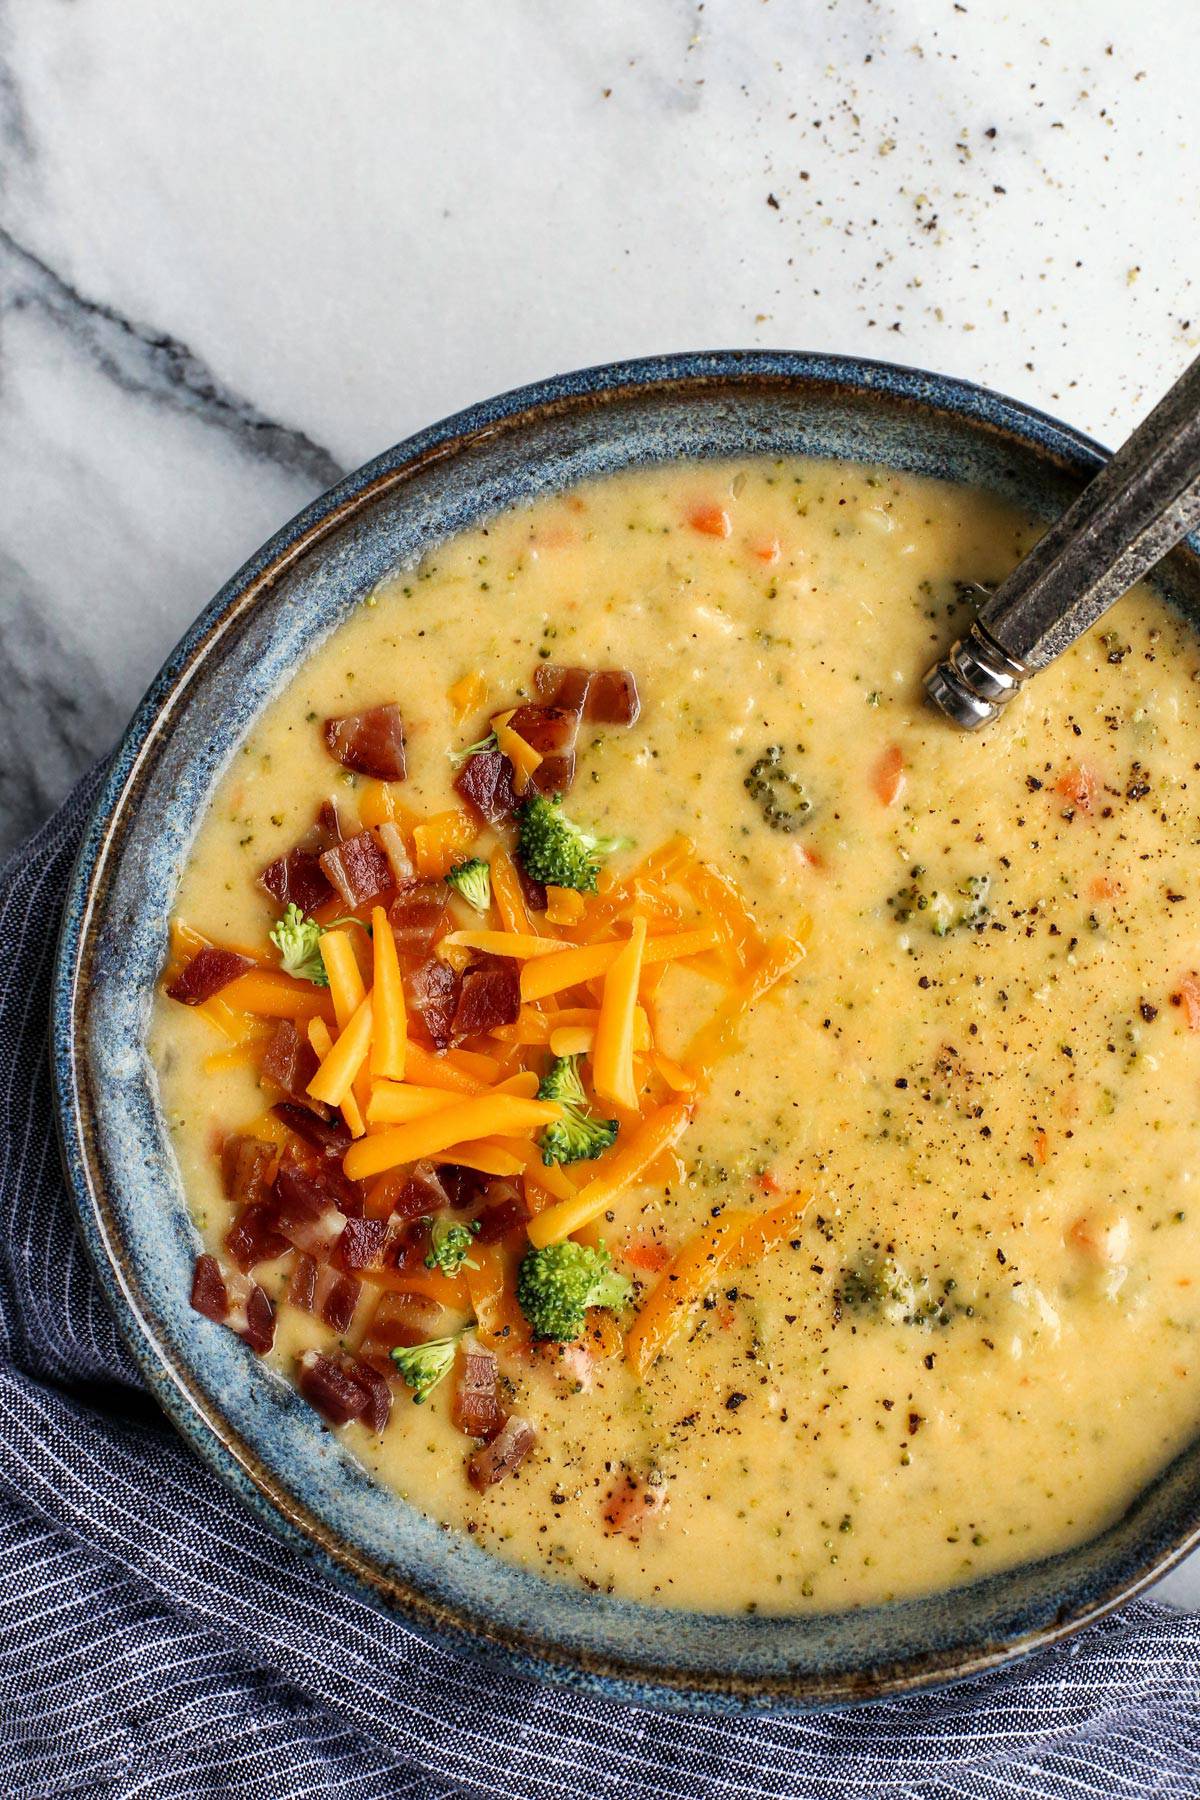 Broccoli Cheddar Soup Loaded with Vegetables and bacon bits on top